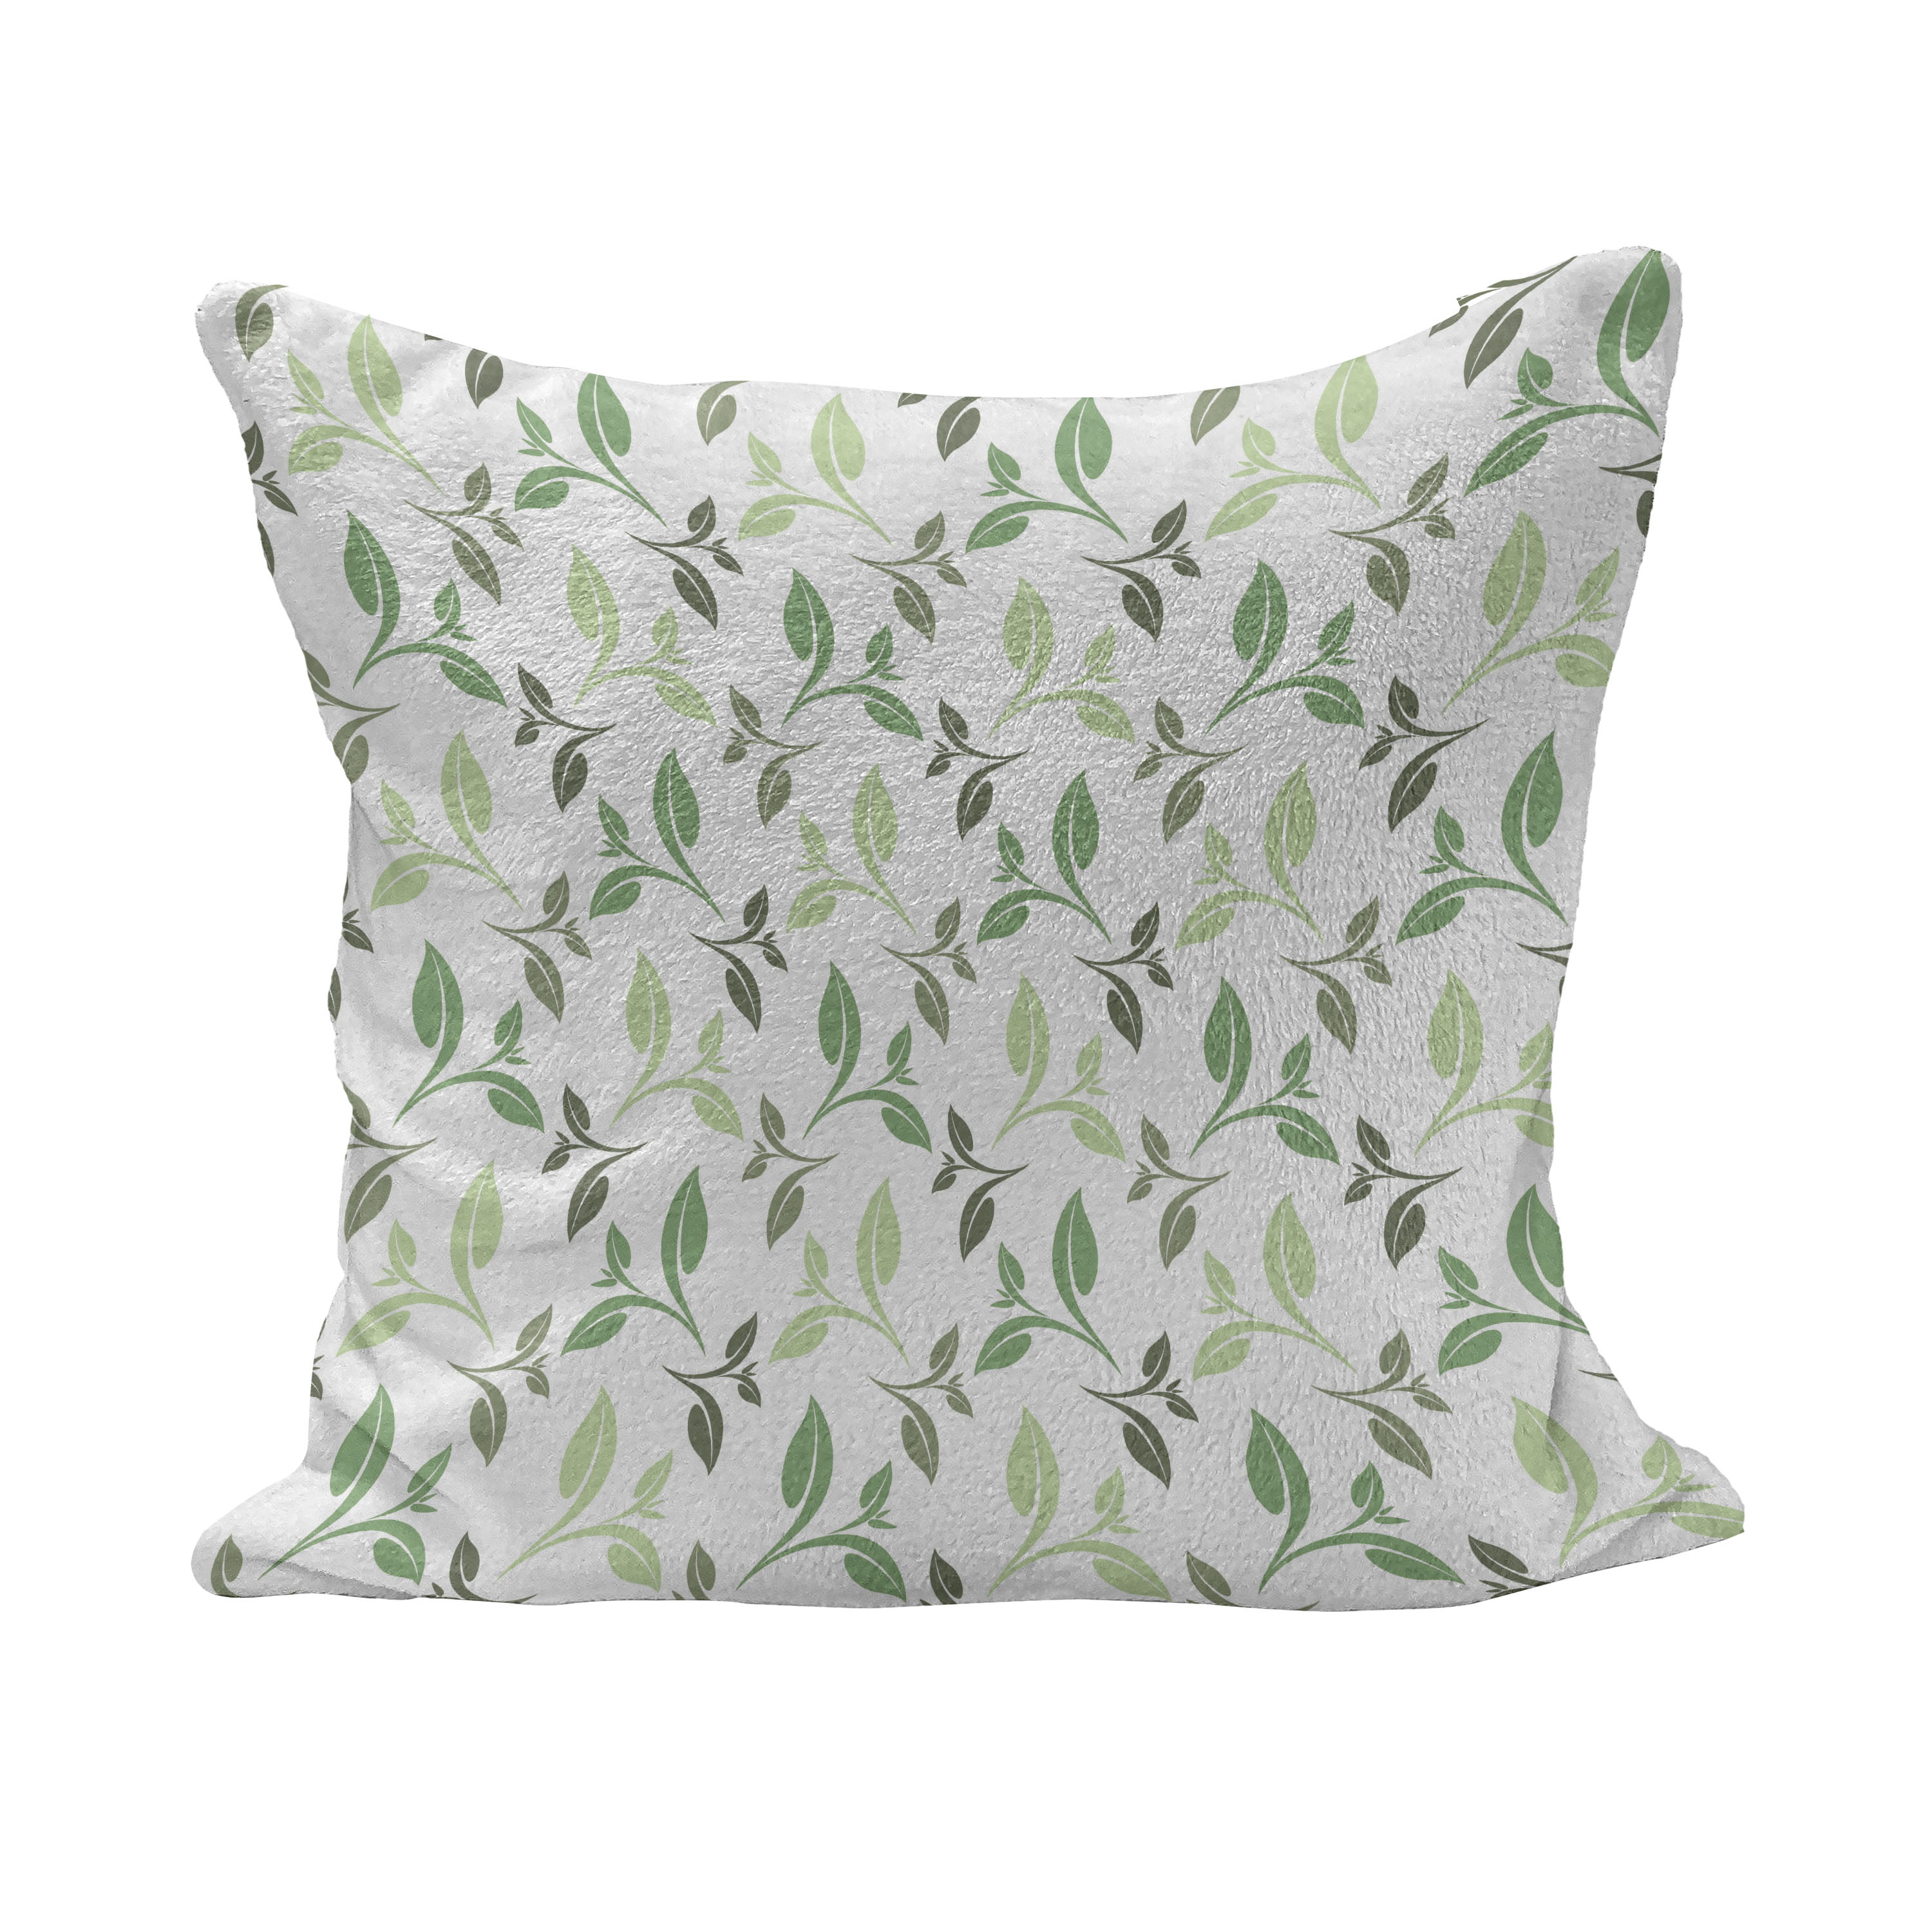 Both Sides Vine Leaves Embroidered Cotton Blend Cushion Cover Pillow Case 